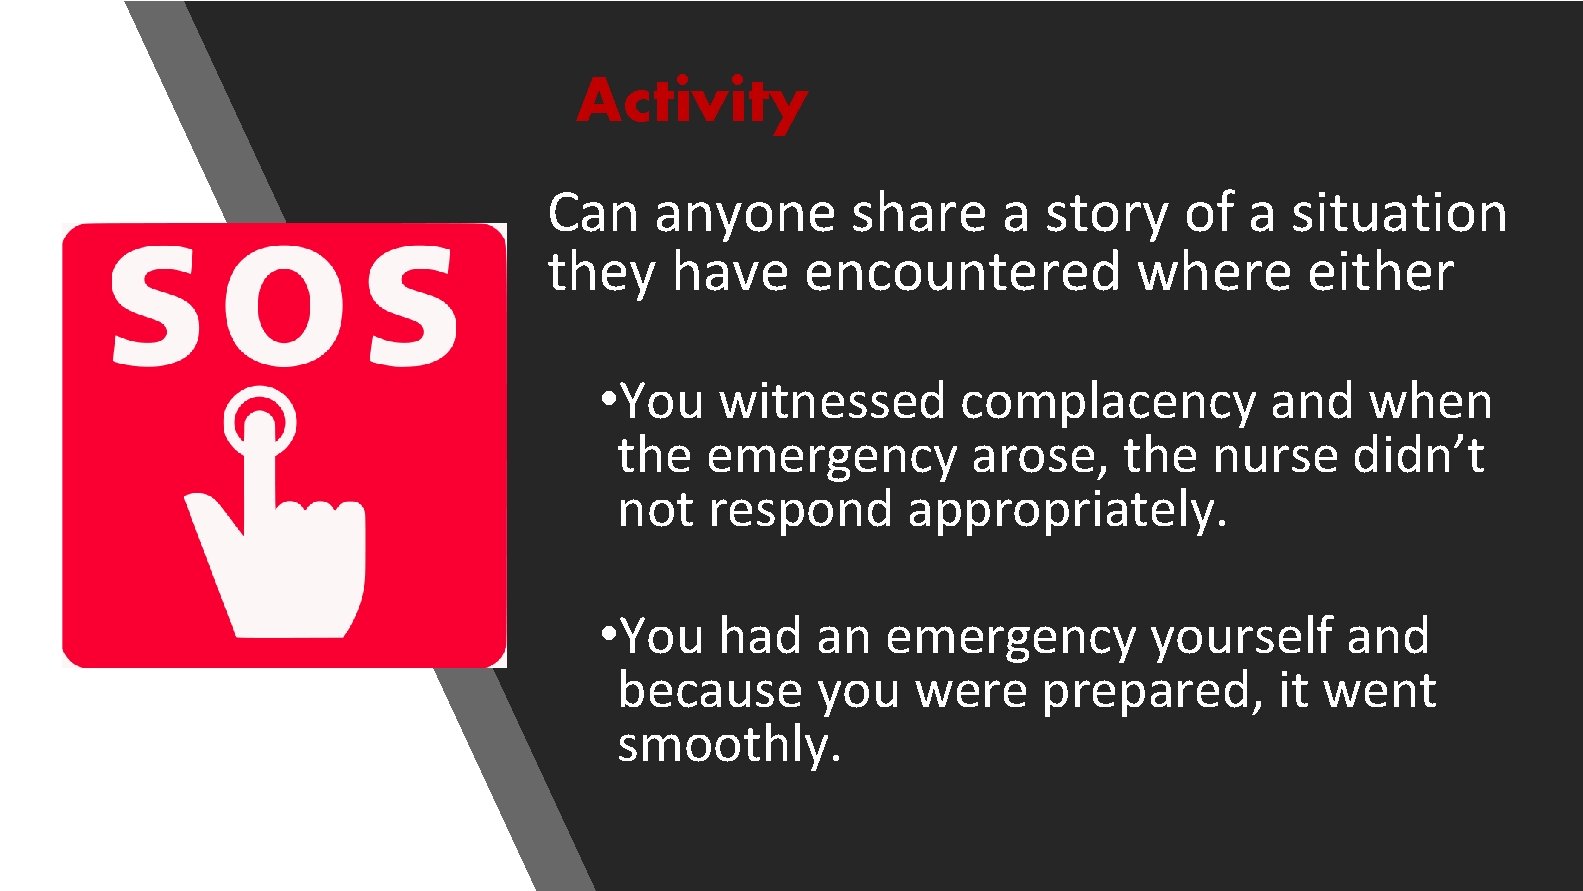 Activity Can anyone share a story of a situation they have encountered where either